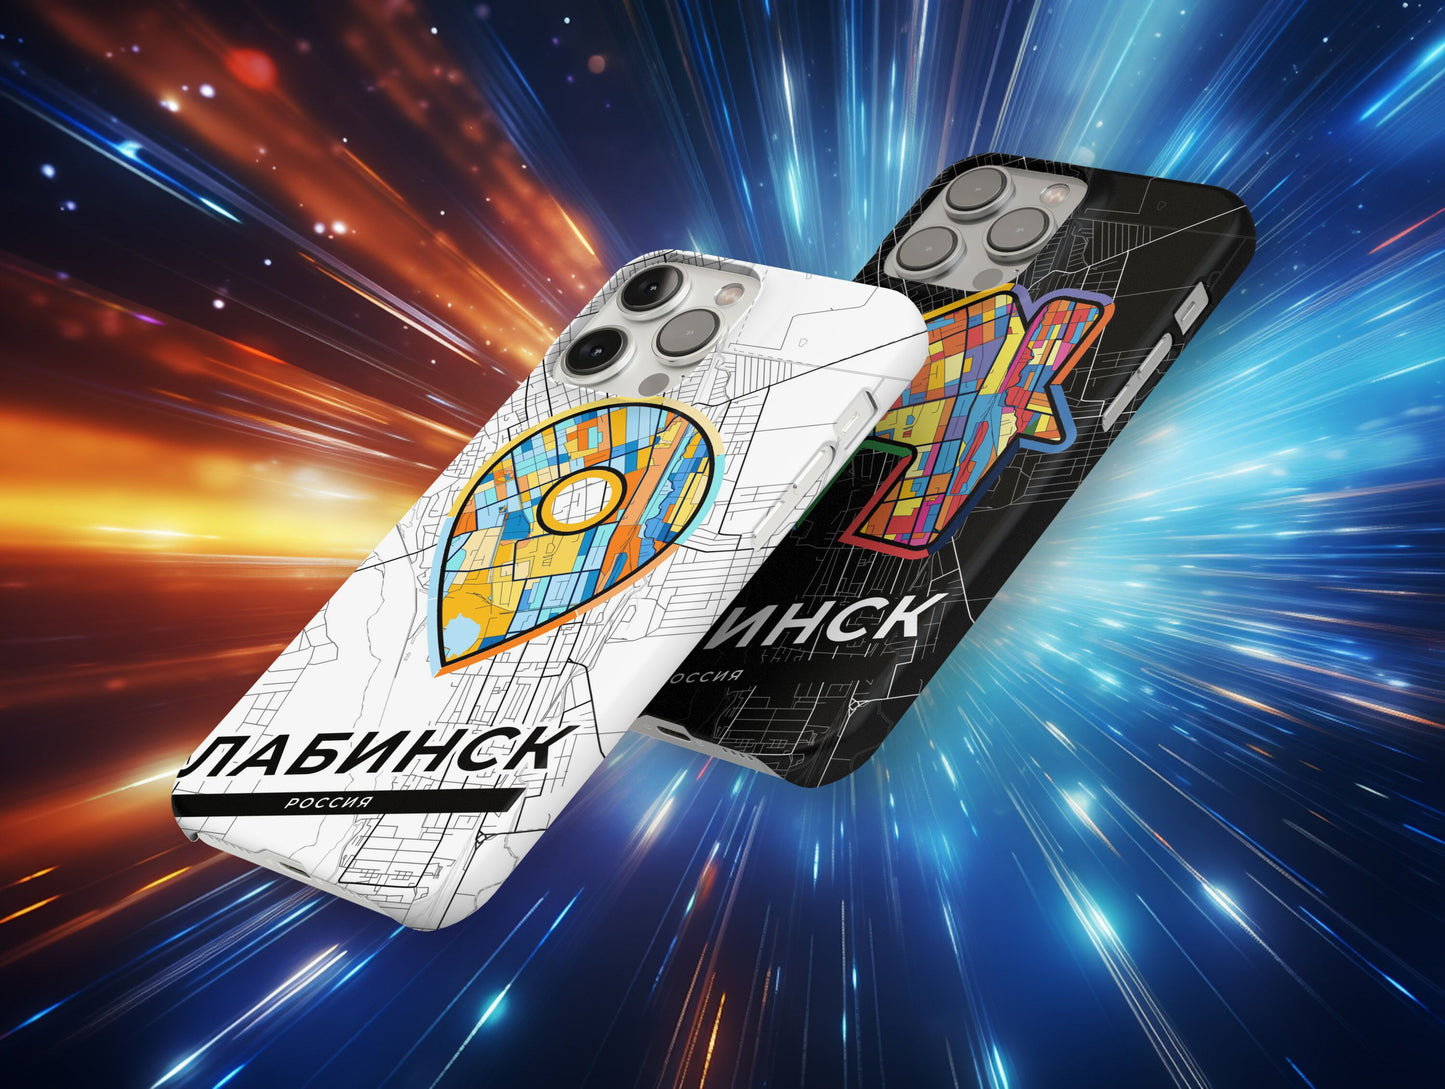 Labinsk Russia slim phone case with colorful icon. Birthday, wedding or housewarming gift. Couple match cases.